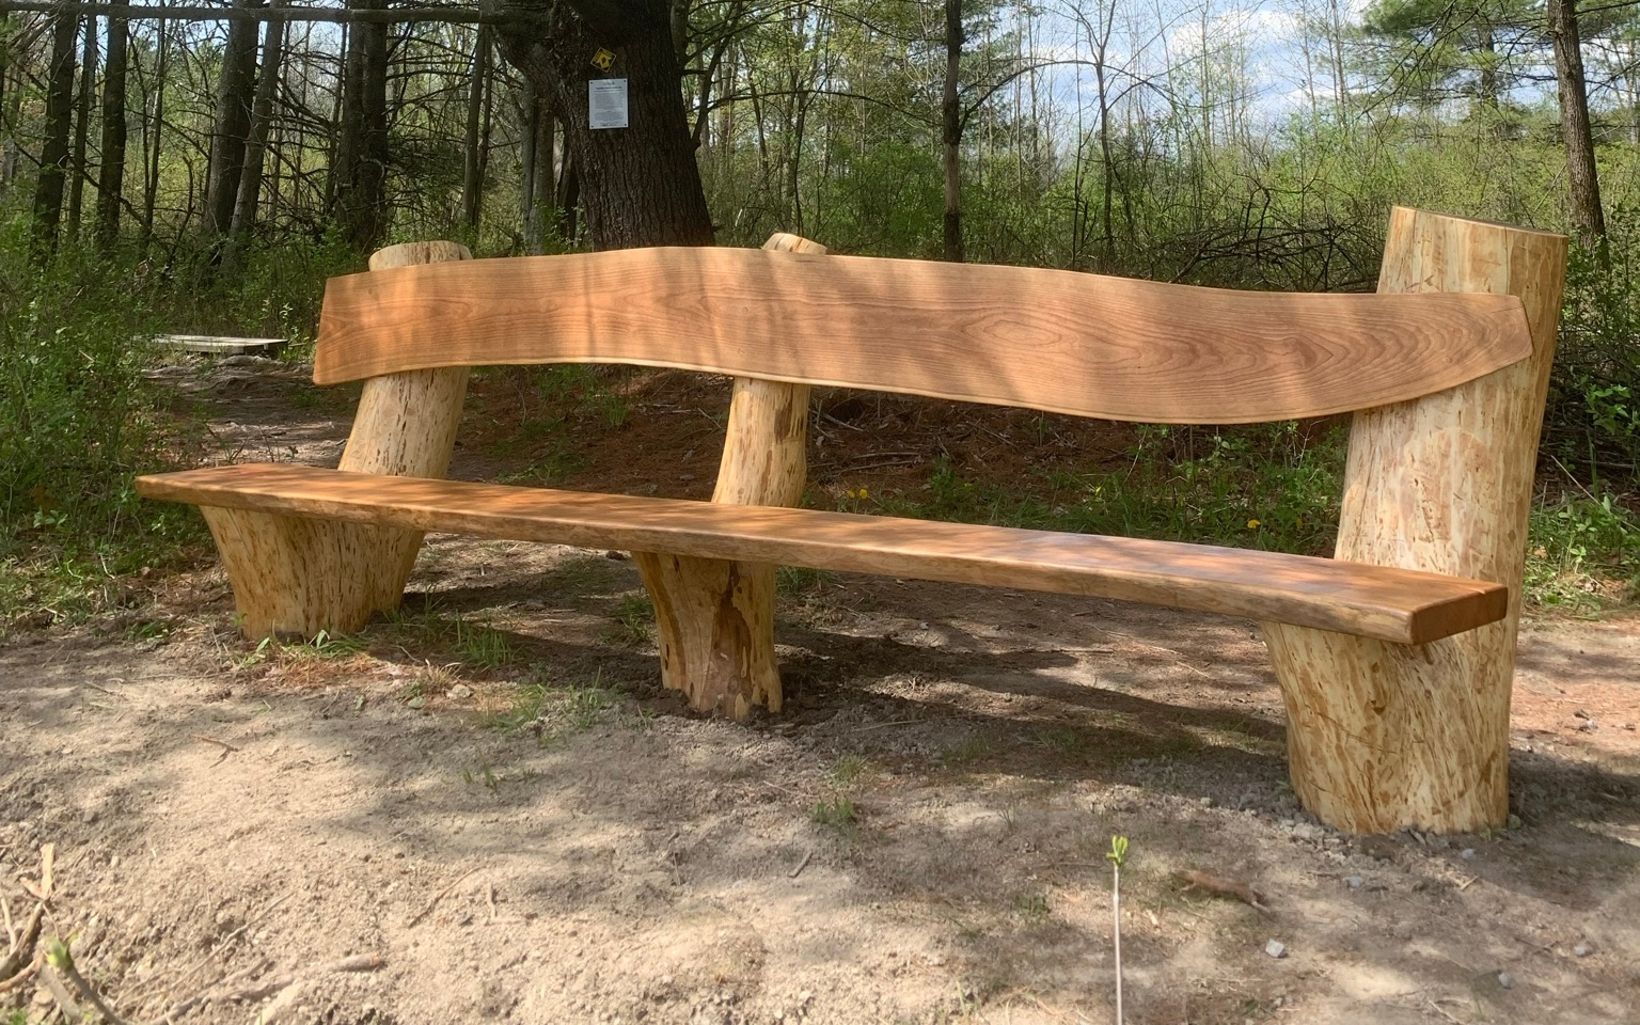 Handmade bench made by woodworking artist- Mario Sacca.